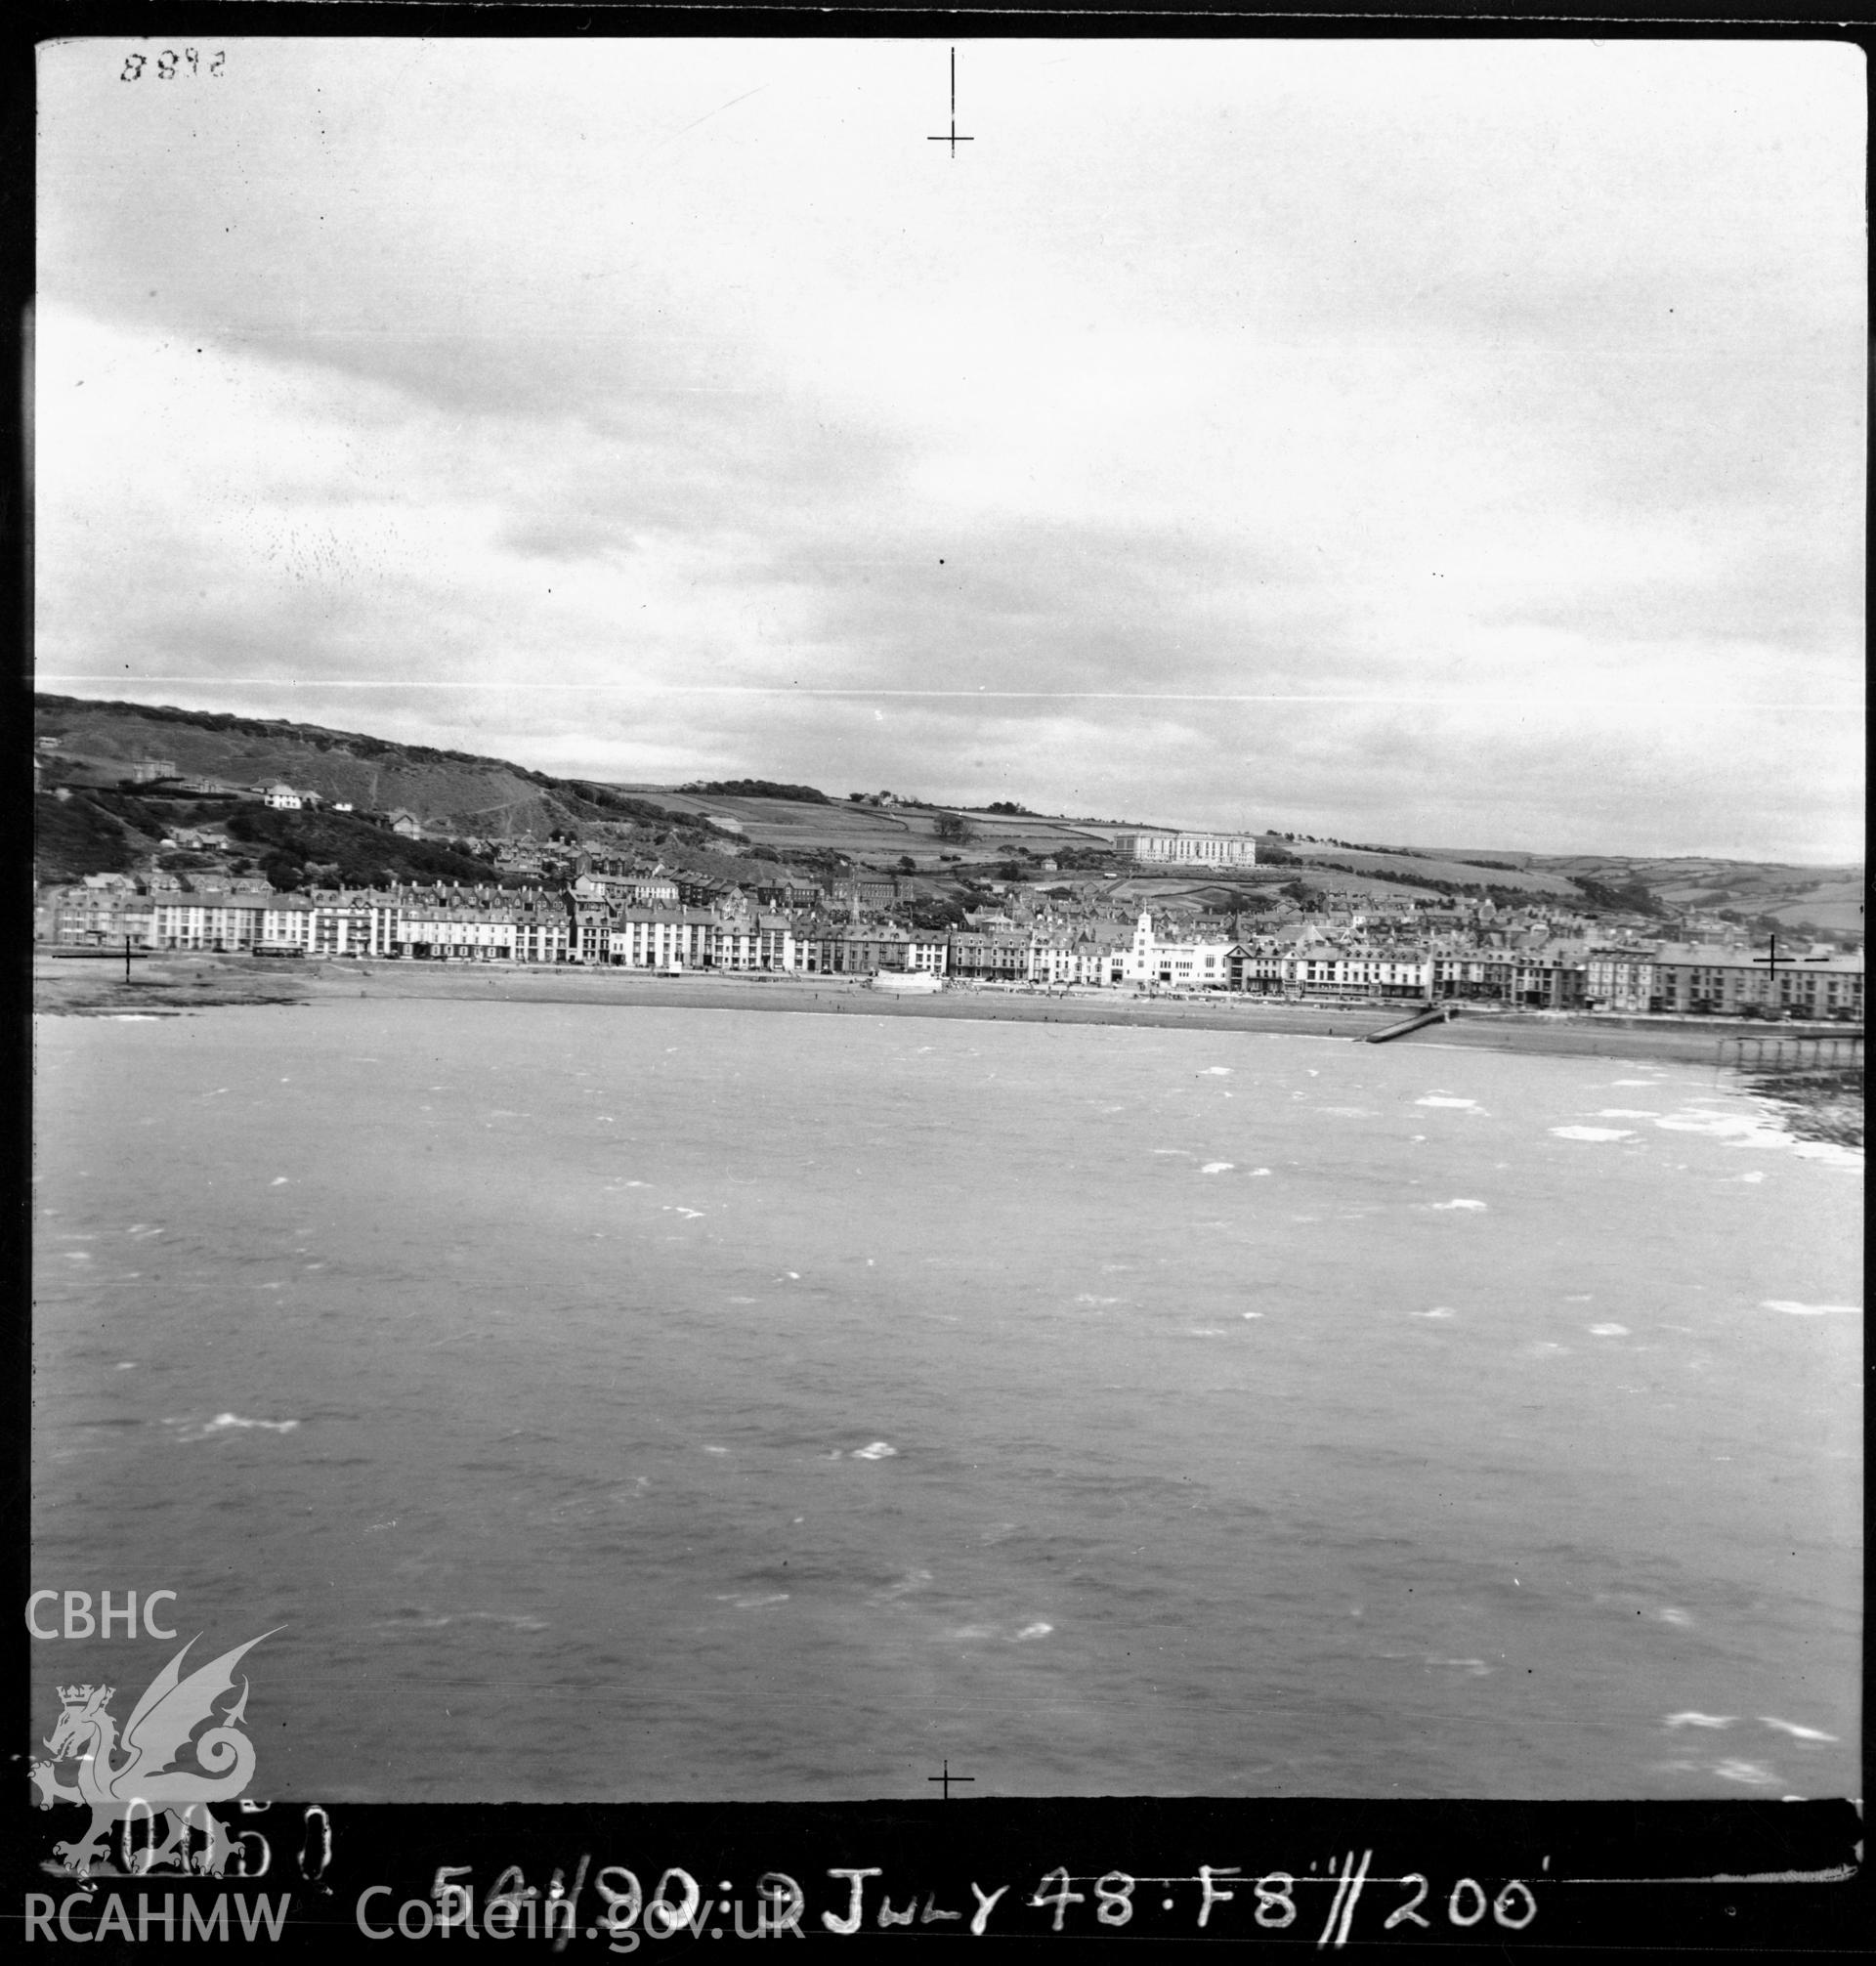 Black and white coastal oblique photograph taken by the RAF in 1948 centred on Aberystwyth